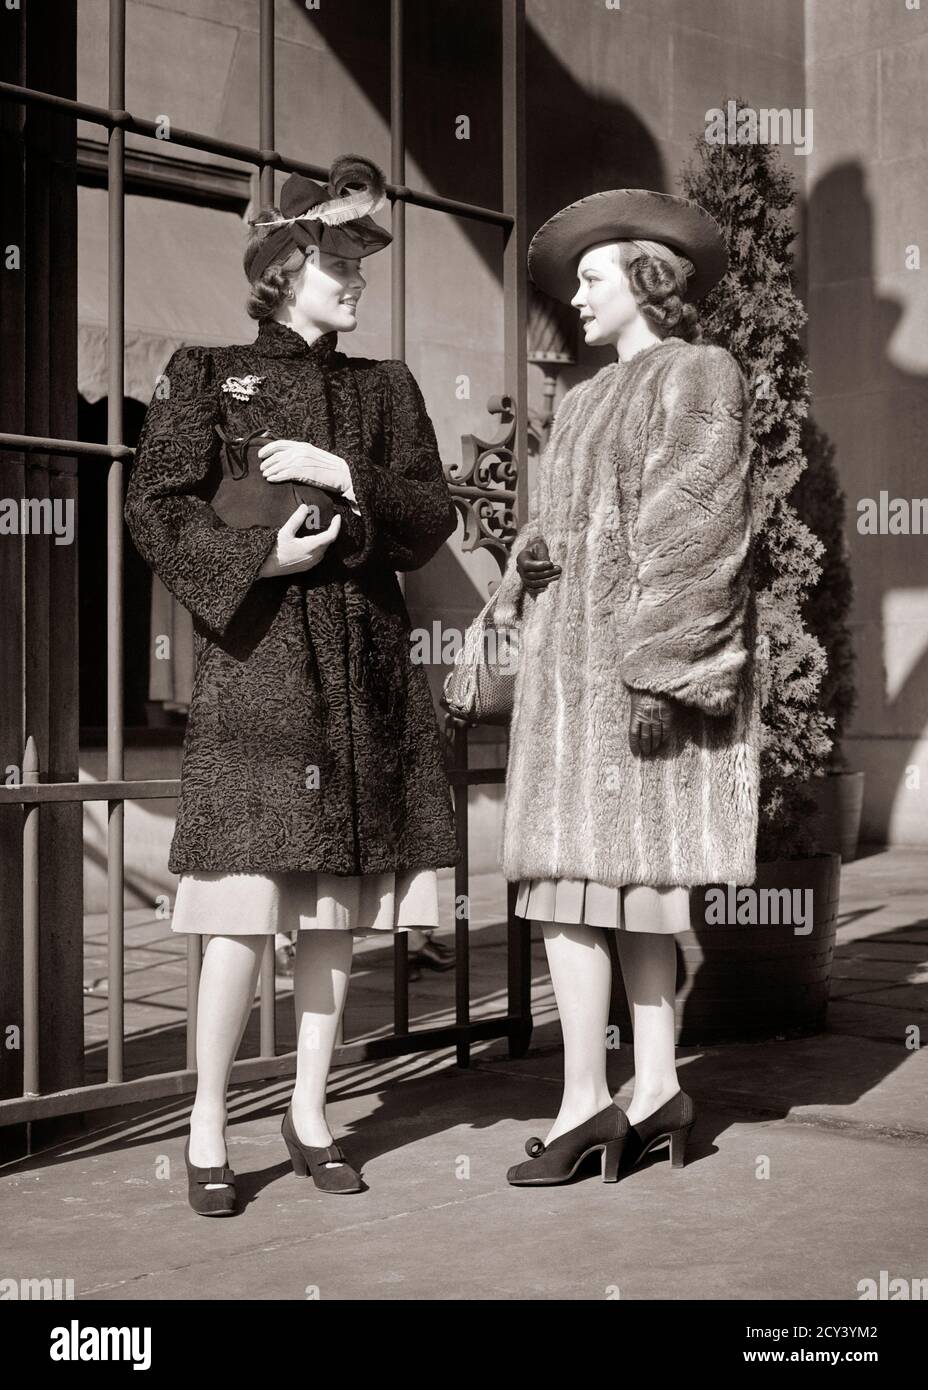 1930s 1940s TWO FASHIONABLE WOMEN WEARING HATS FUR COATS GLOVES STANDING MEETING TALKING TOGETHER SHOPPING OUTSIDE UPSCALE STORE - f4234 HAR001 HARS COMMUNICATION YOUNG ADULT WEALTHY FASHIONABLE RICH LIFESTYLE FEMALES COATS LUXURY COPY SPACE FRIENDSHIP FULL-LENGTH LADIES PERSONS CONFIDENCE B&W HANDBAGS BUZZ HAPPINESS STYLES BUSYBODY PRIDE TELLING STORIES UPSCALE CONCEPTUAL AFFLUENT STYLISH TATTLER HEARSAY CHINCHILLA FASHIONS MID-ADULT MID-ADULT WOMAN RUMORS TOGETHERNESS WELL-TO-DO YOUNG ADULT WOMAN BLACK AND WHITE CAUCASIAN ETHNICITY HAR001 HIGH HEELS OLD FASHIONED PERSIAN LAMB Stock Photo